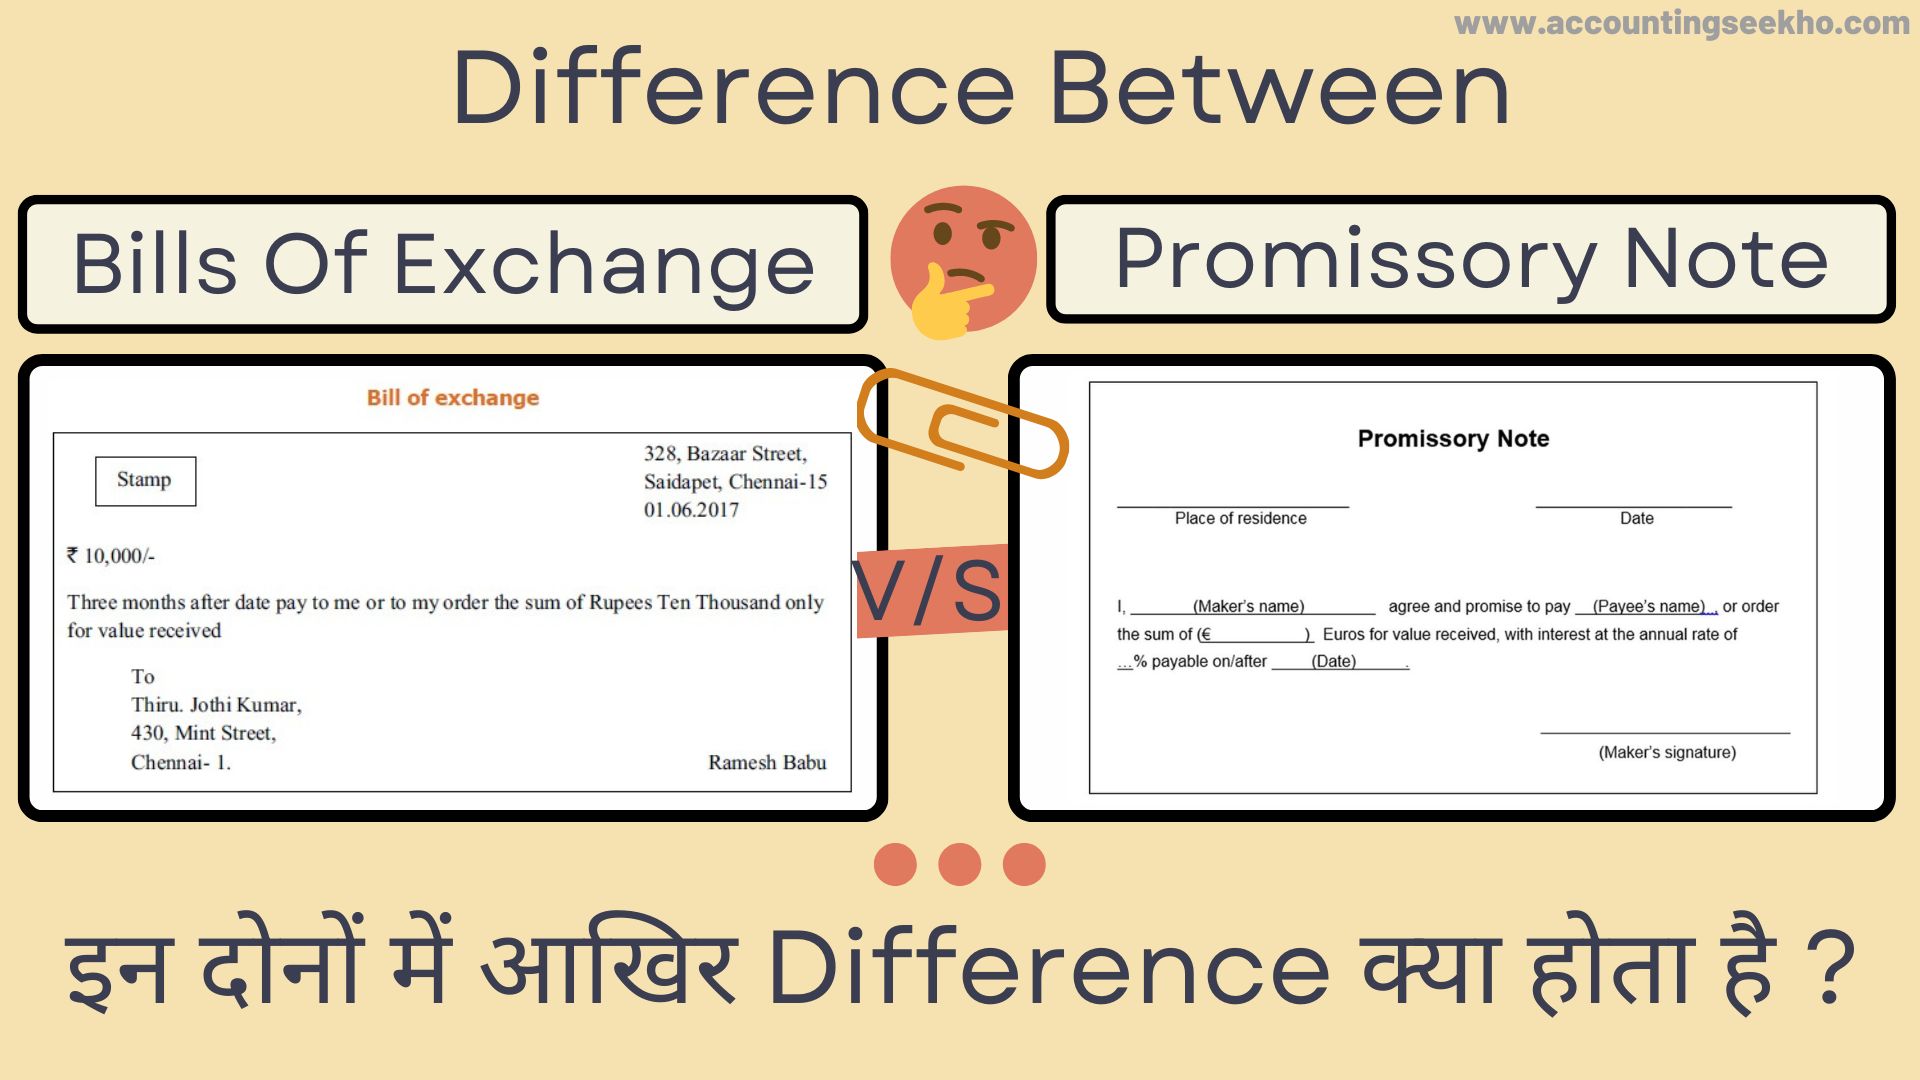 Difference Between Bills Of Exchange And Promissory Note In Hindi